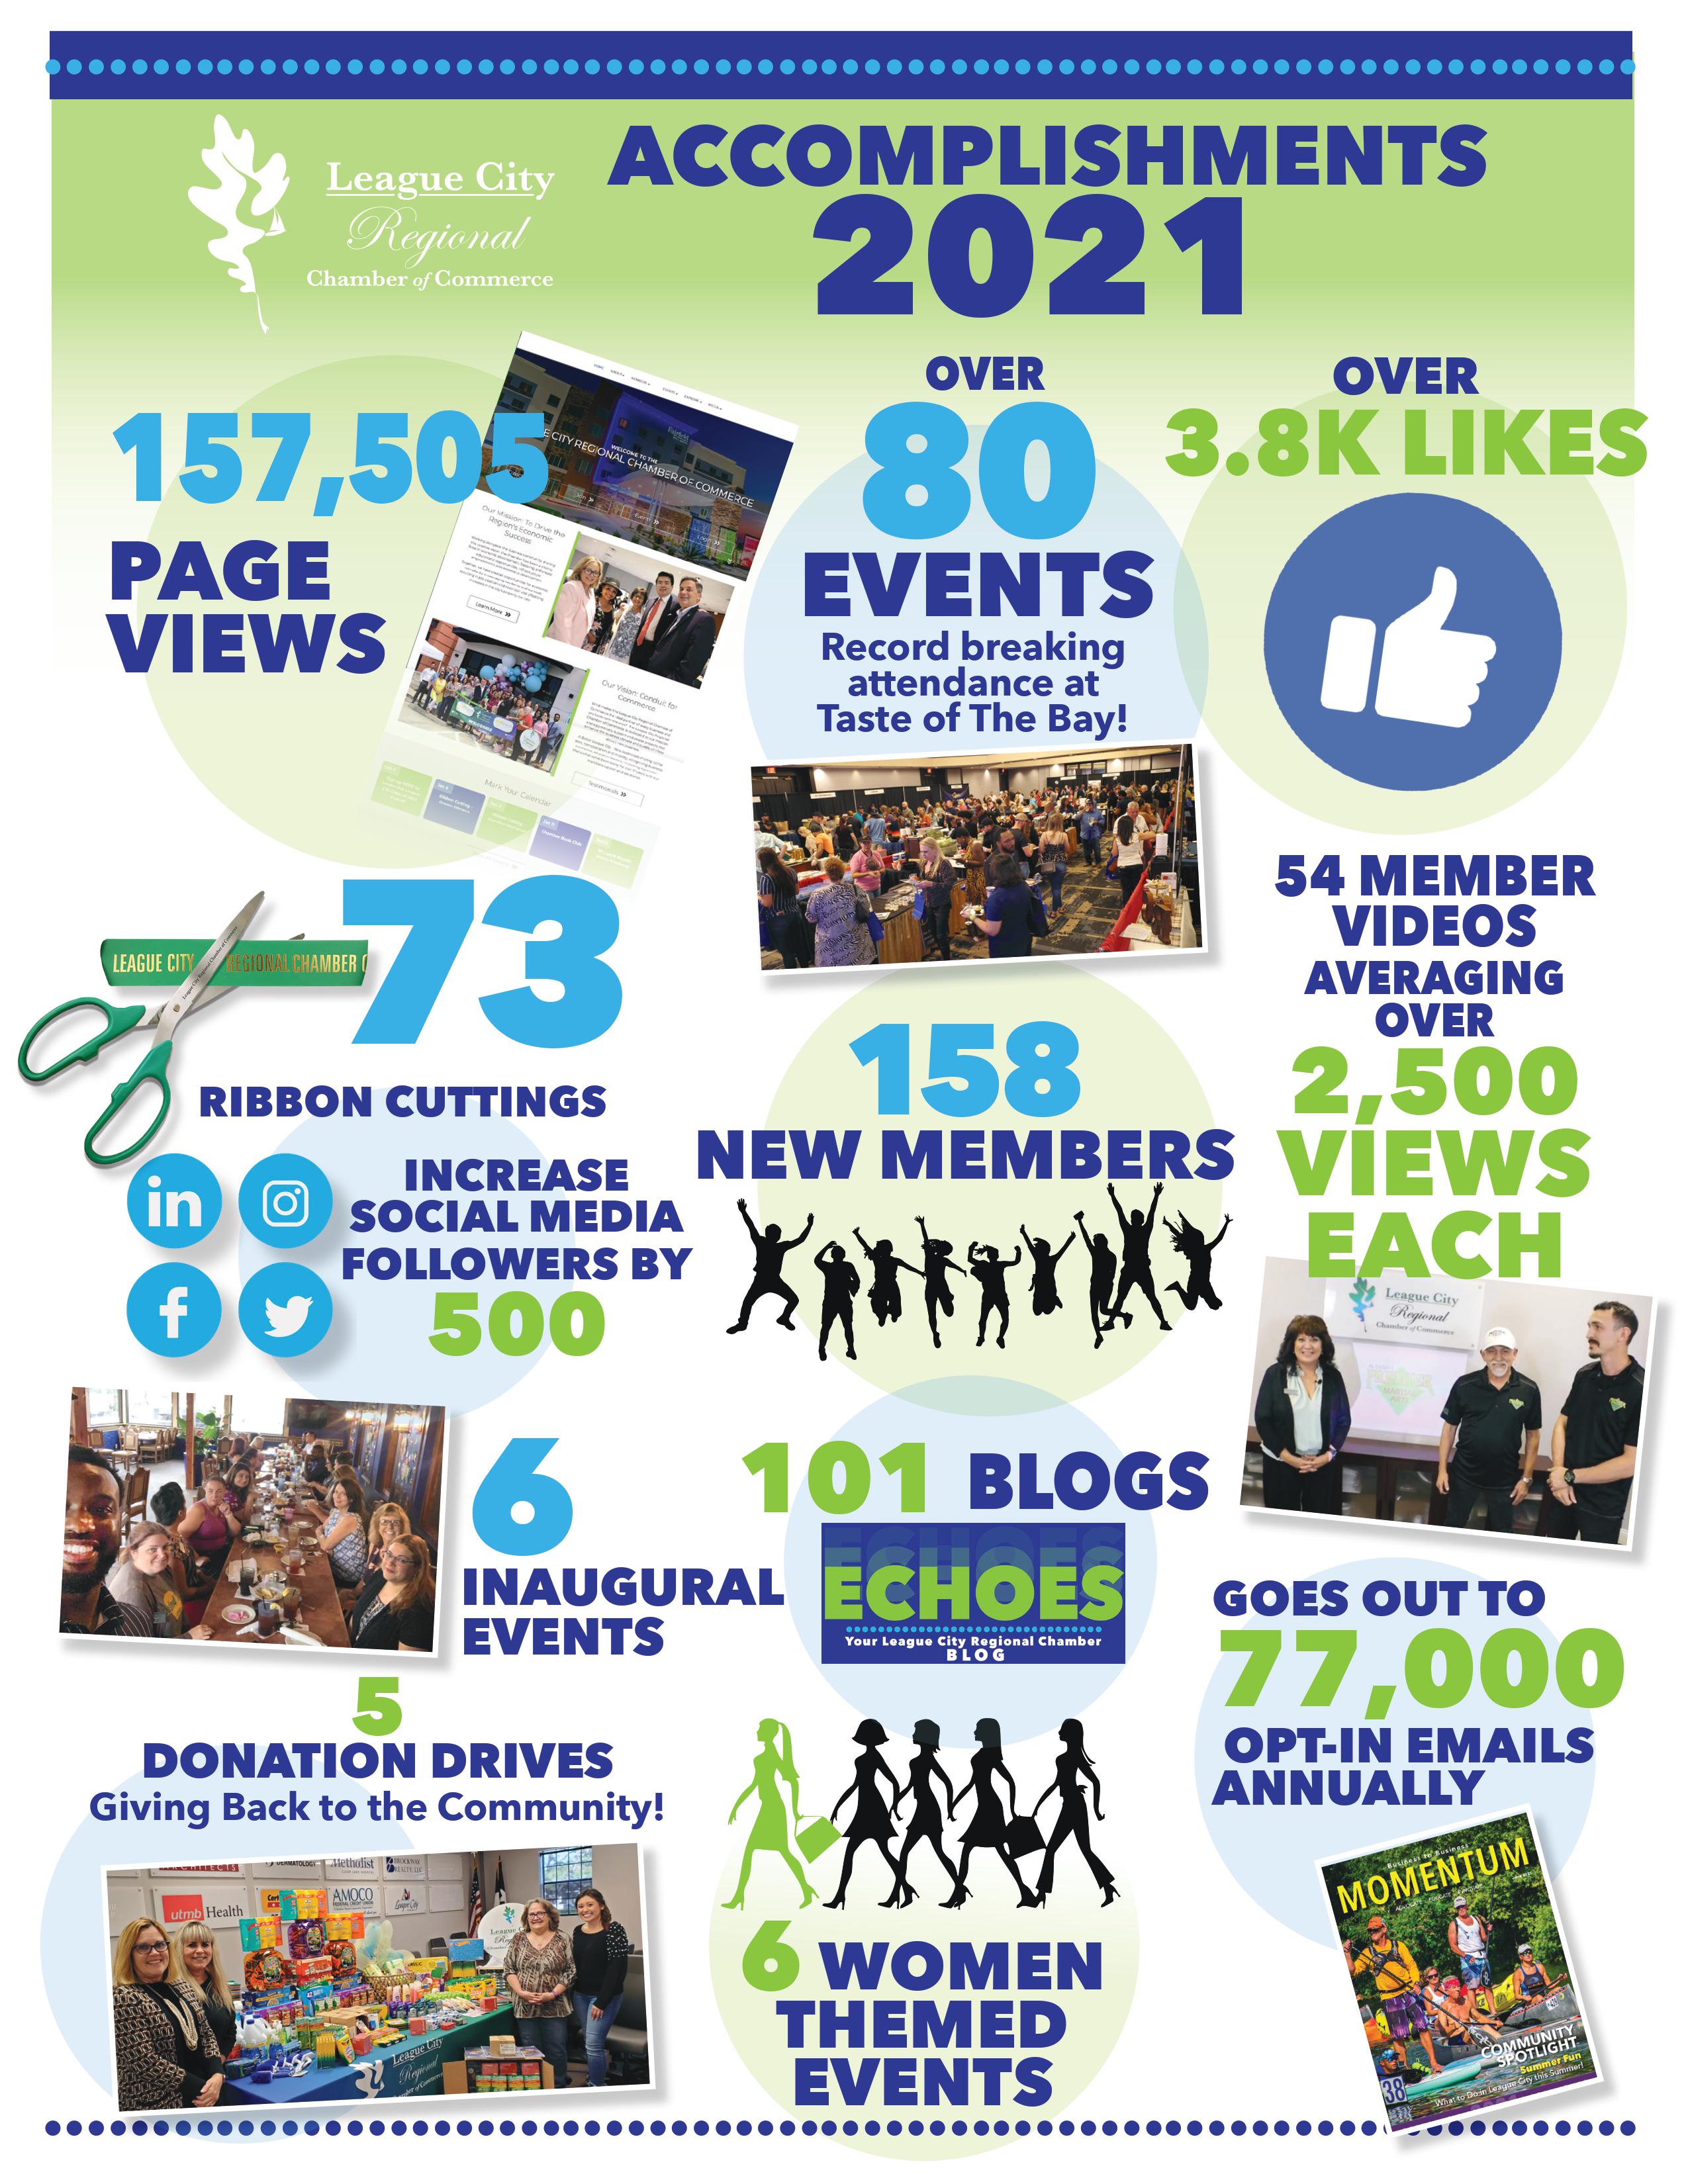 Check out your chamber’s 2021 Accomplishments!